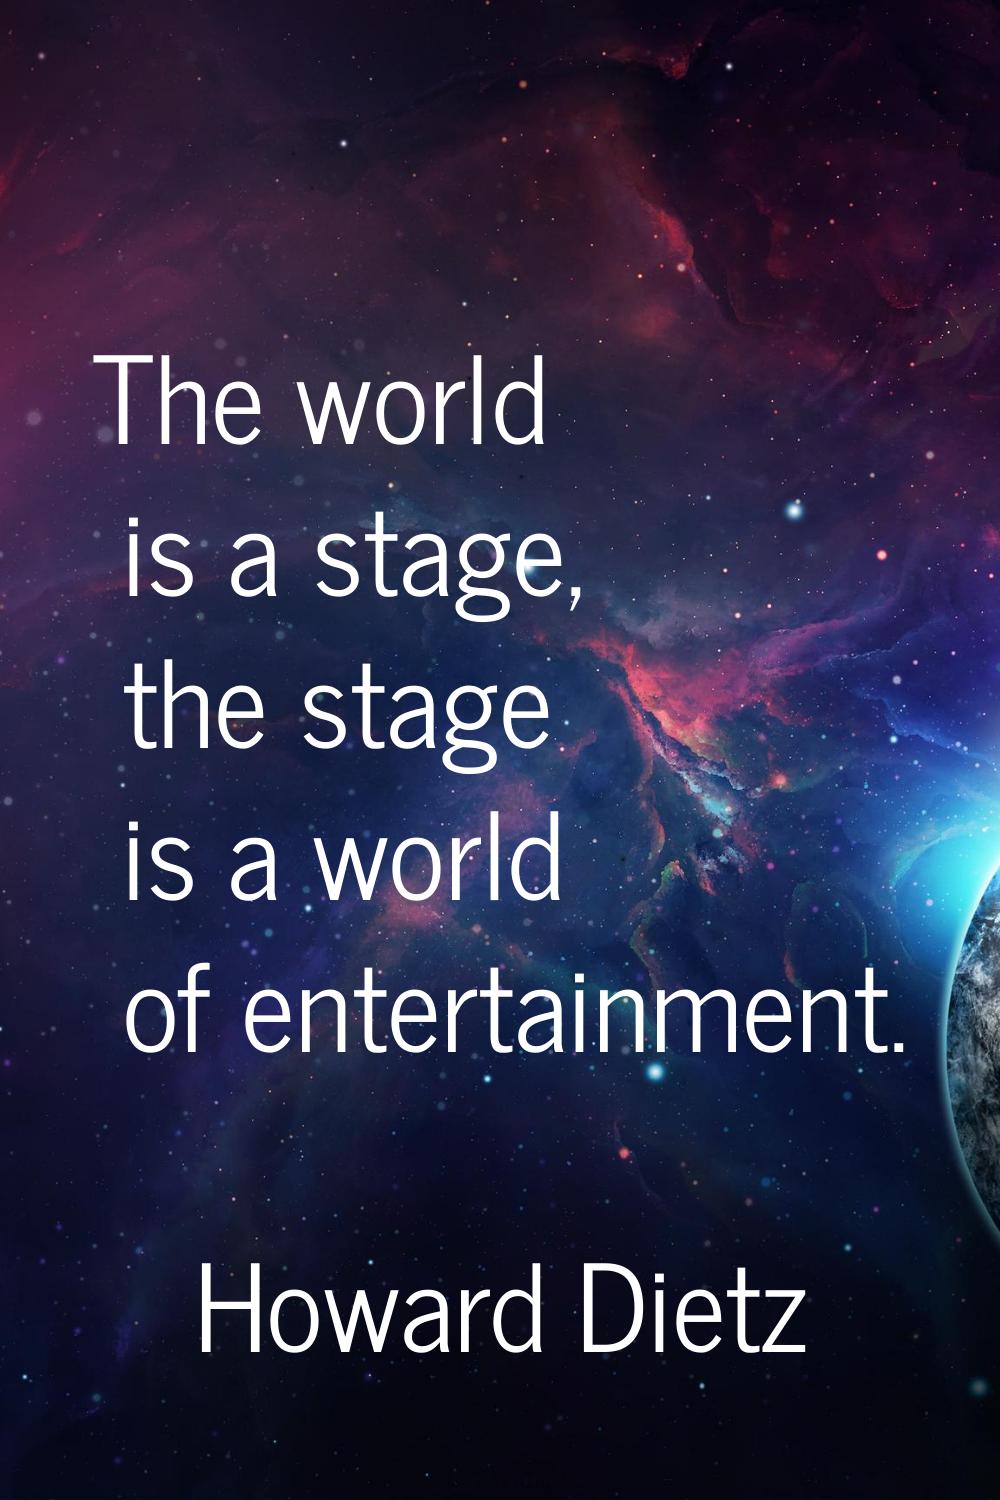 The world is a stage, the stage is a world of entertainment.